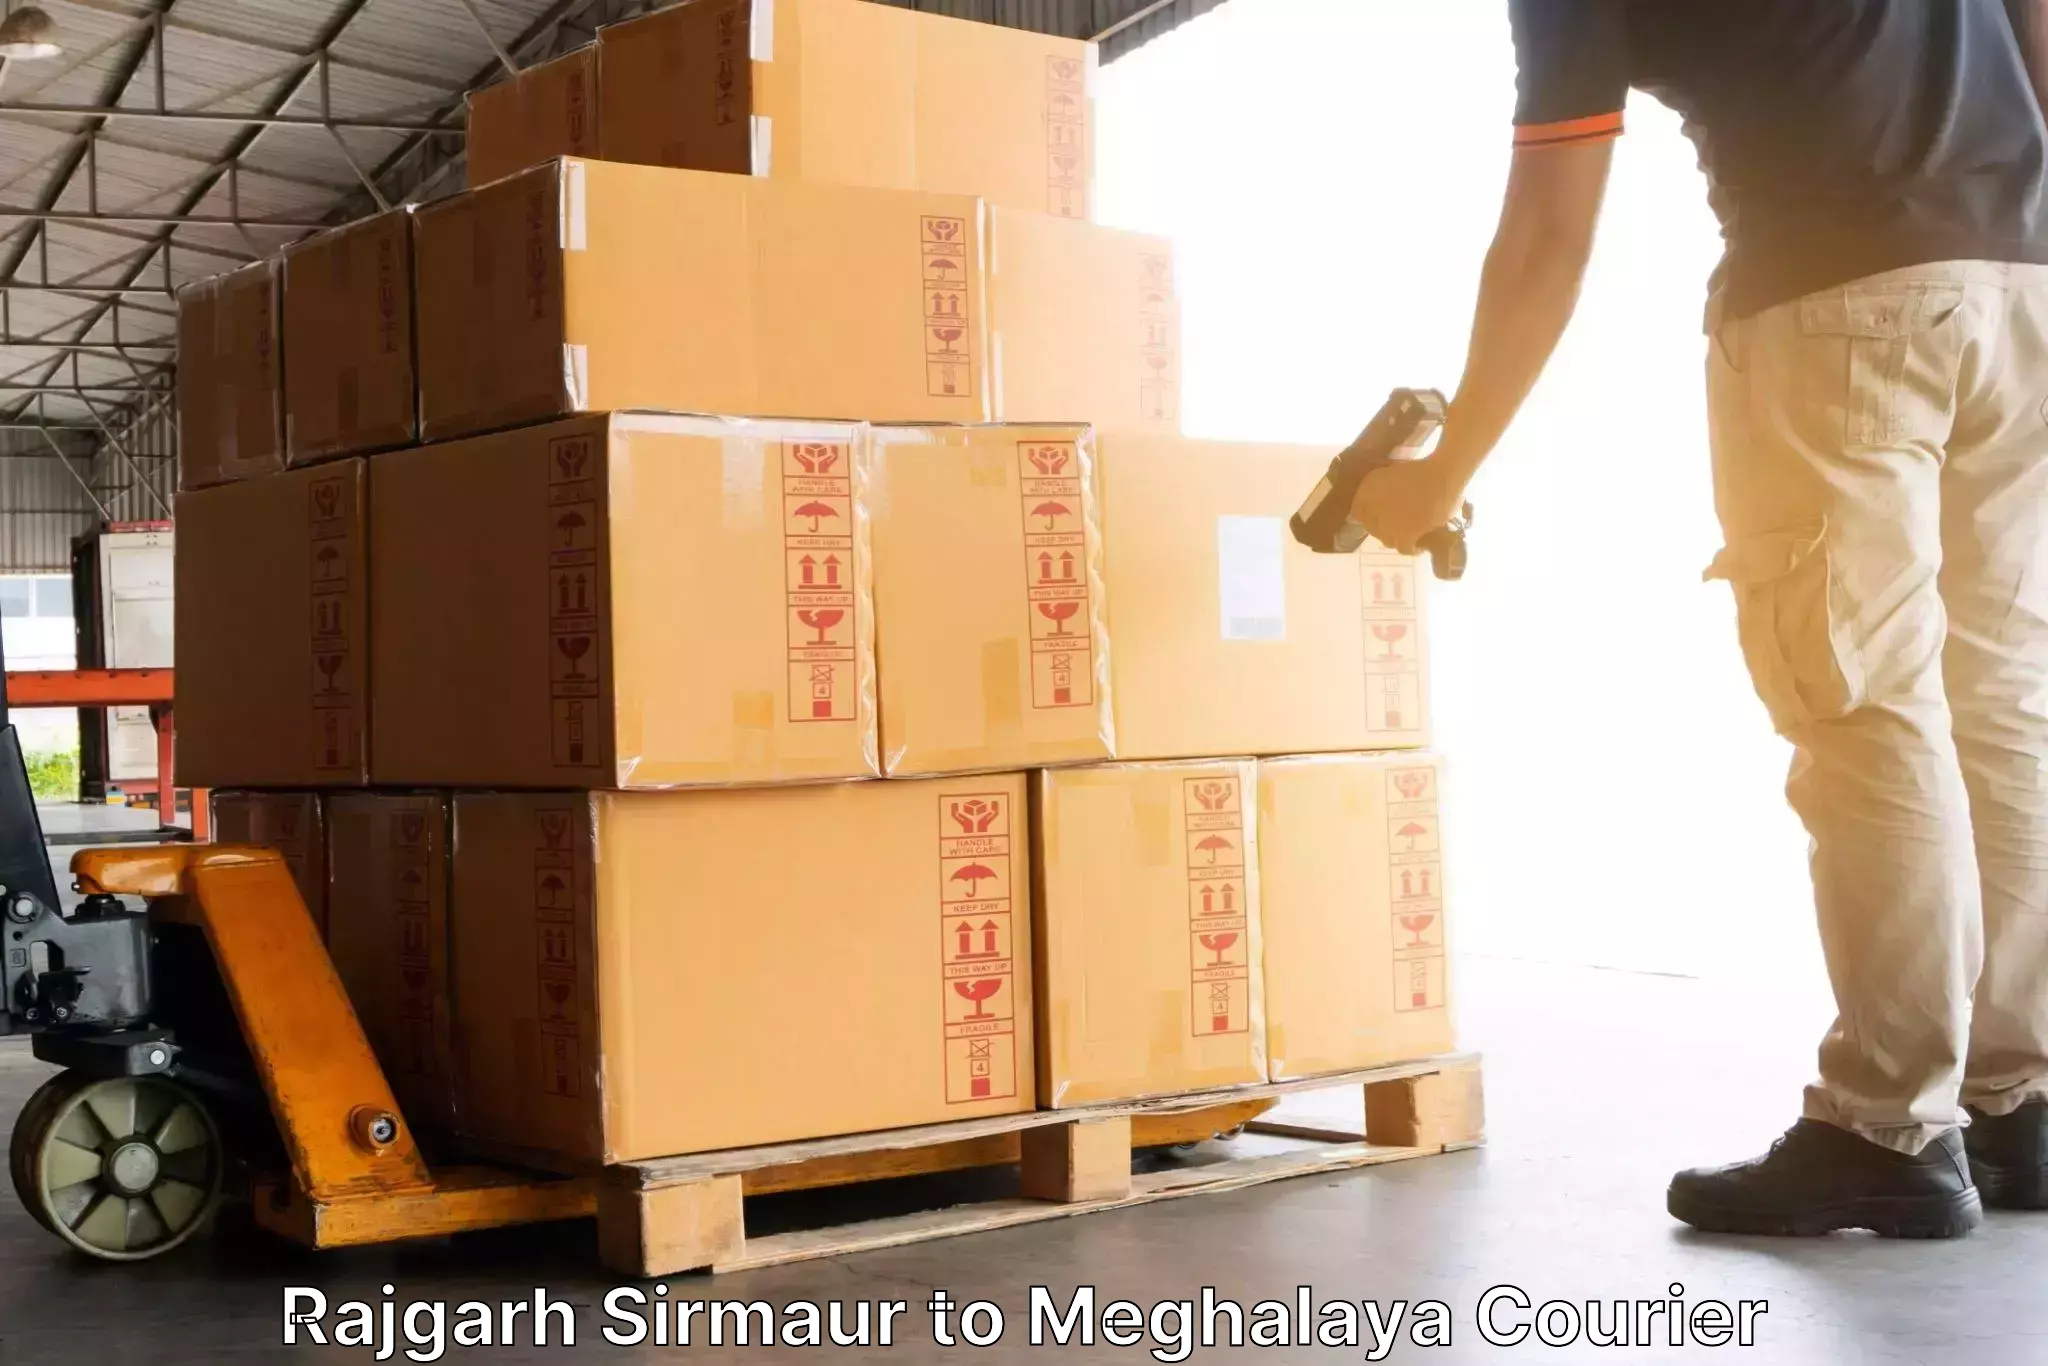 Same-day delivery solutions Rajgarh Sirmaur to Shillong